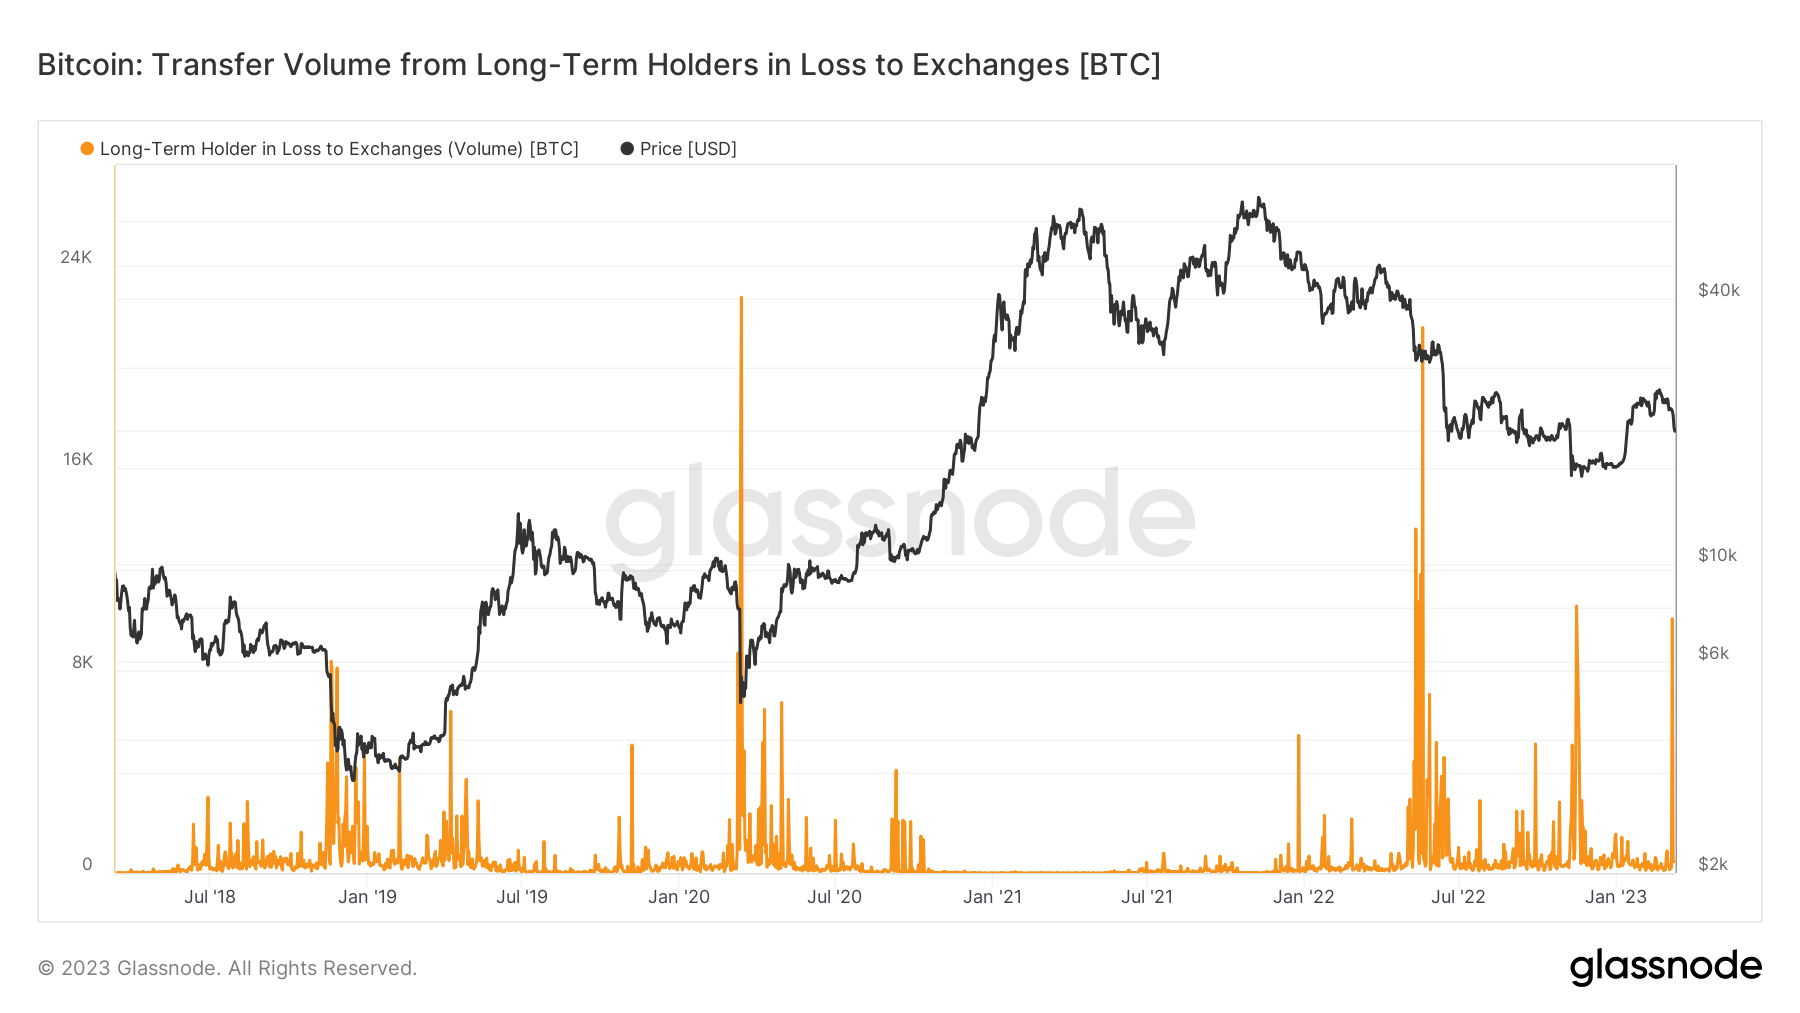 Transfer Volume LTH to exchanges in loss: (Source: Glassnode)